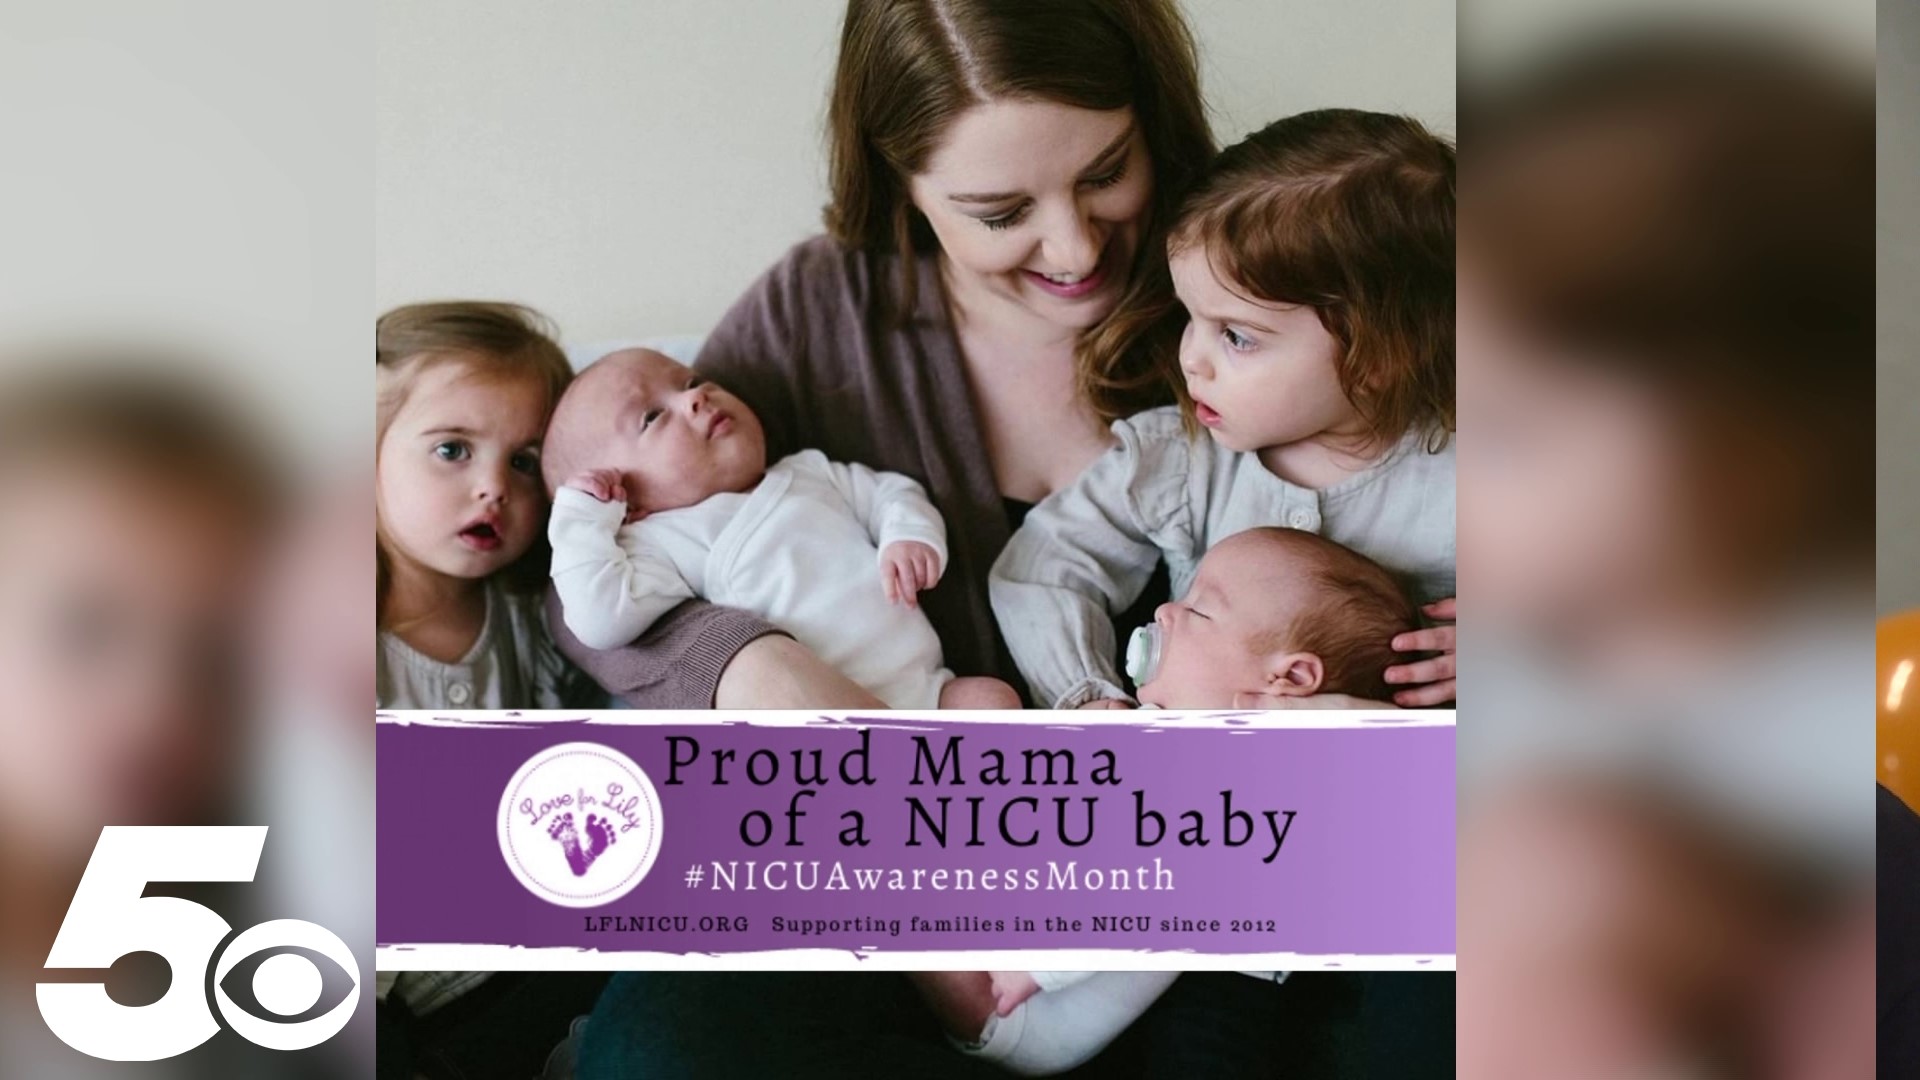 A mother of two sets of twins has started a nonprofit to support parents who went through what she and her husband went through two years ago.